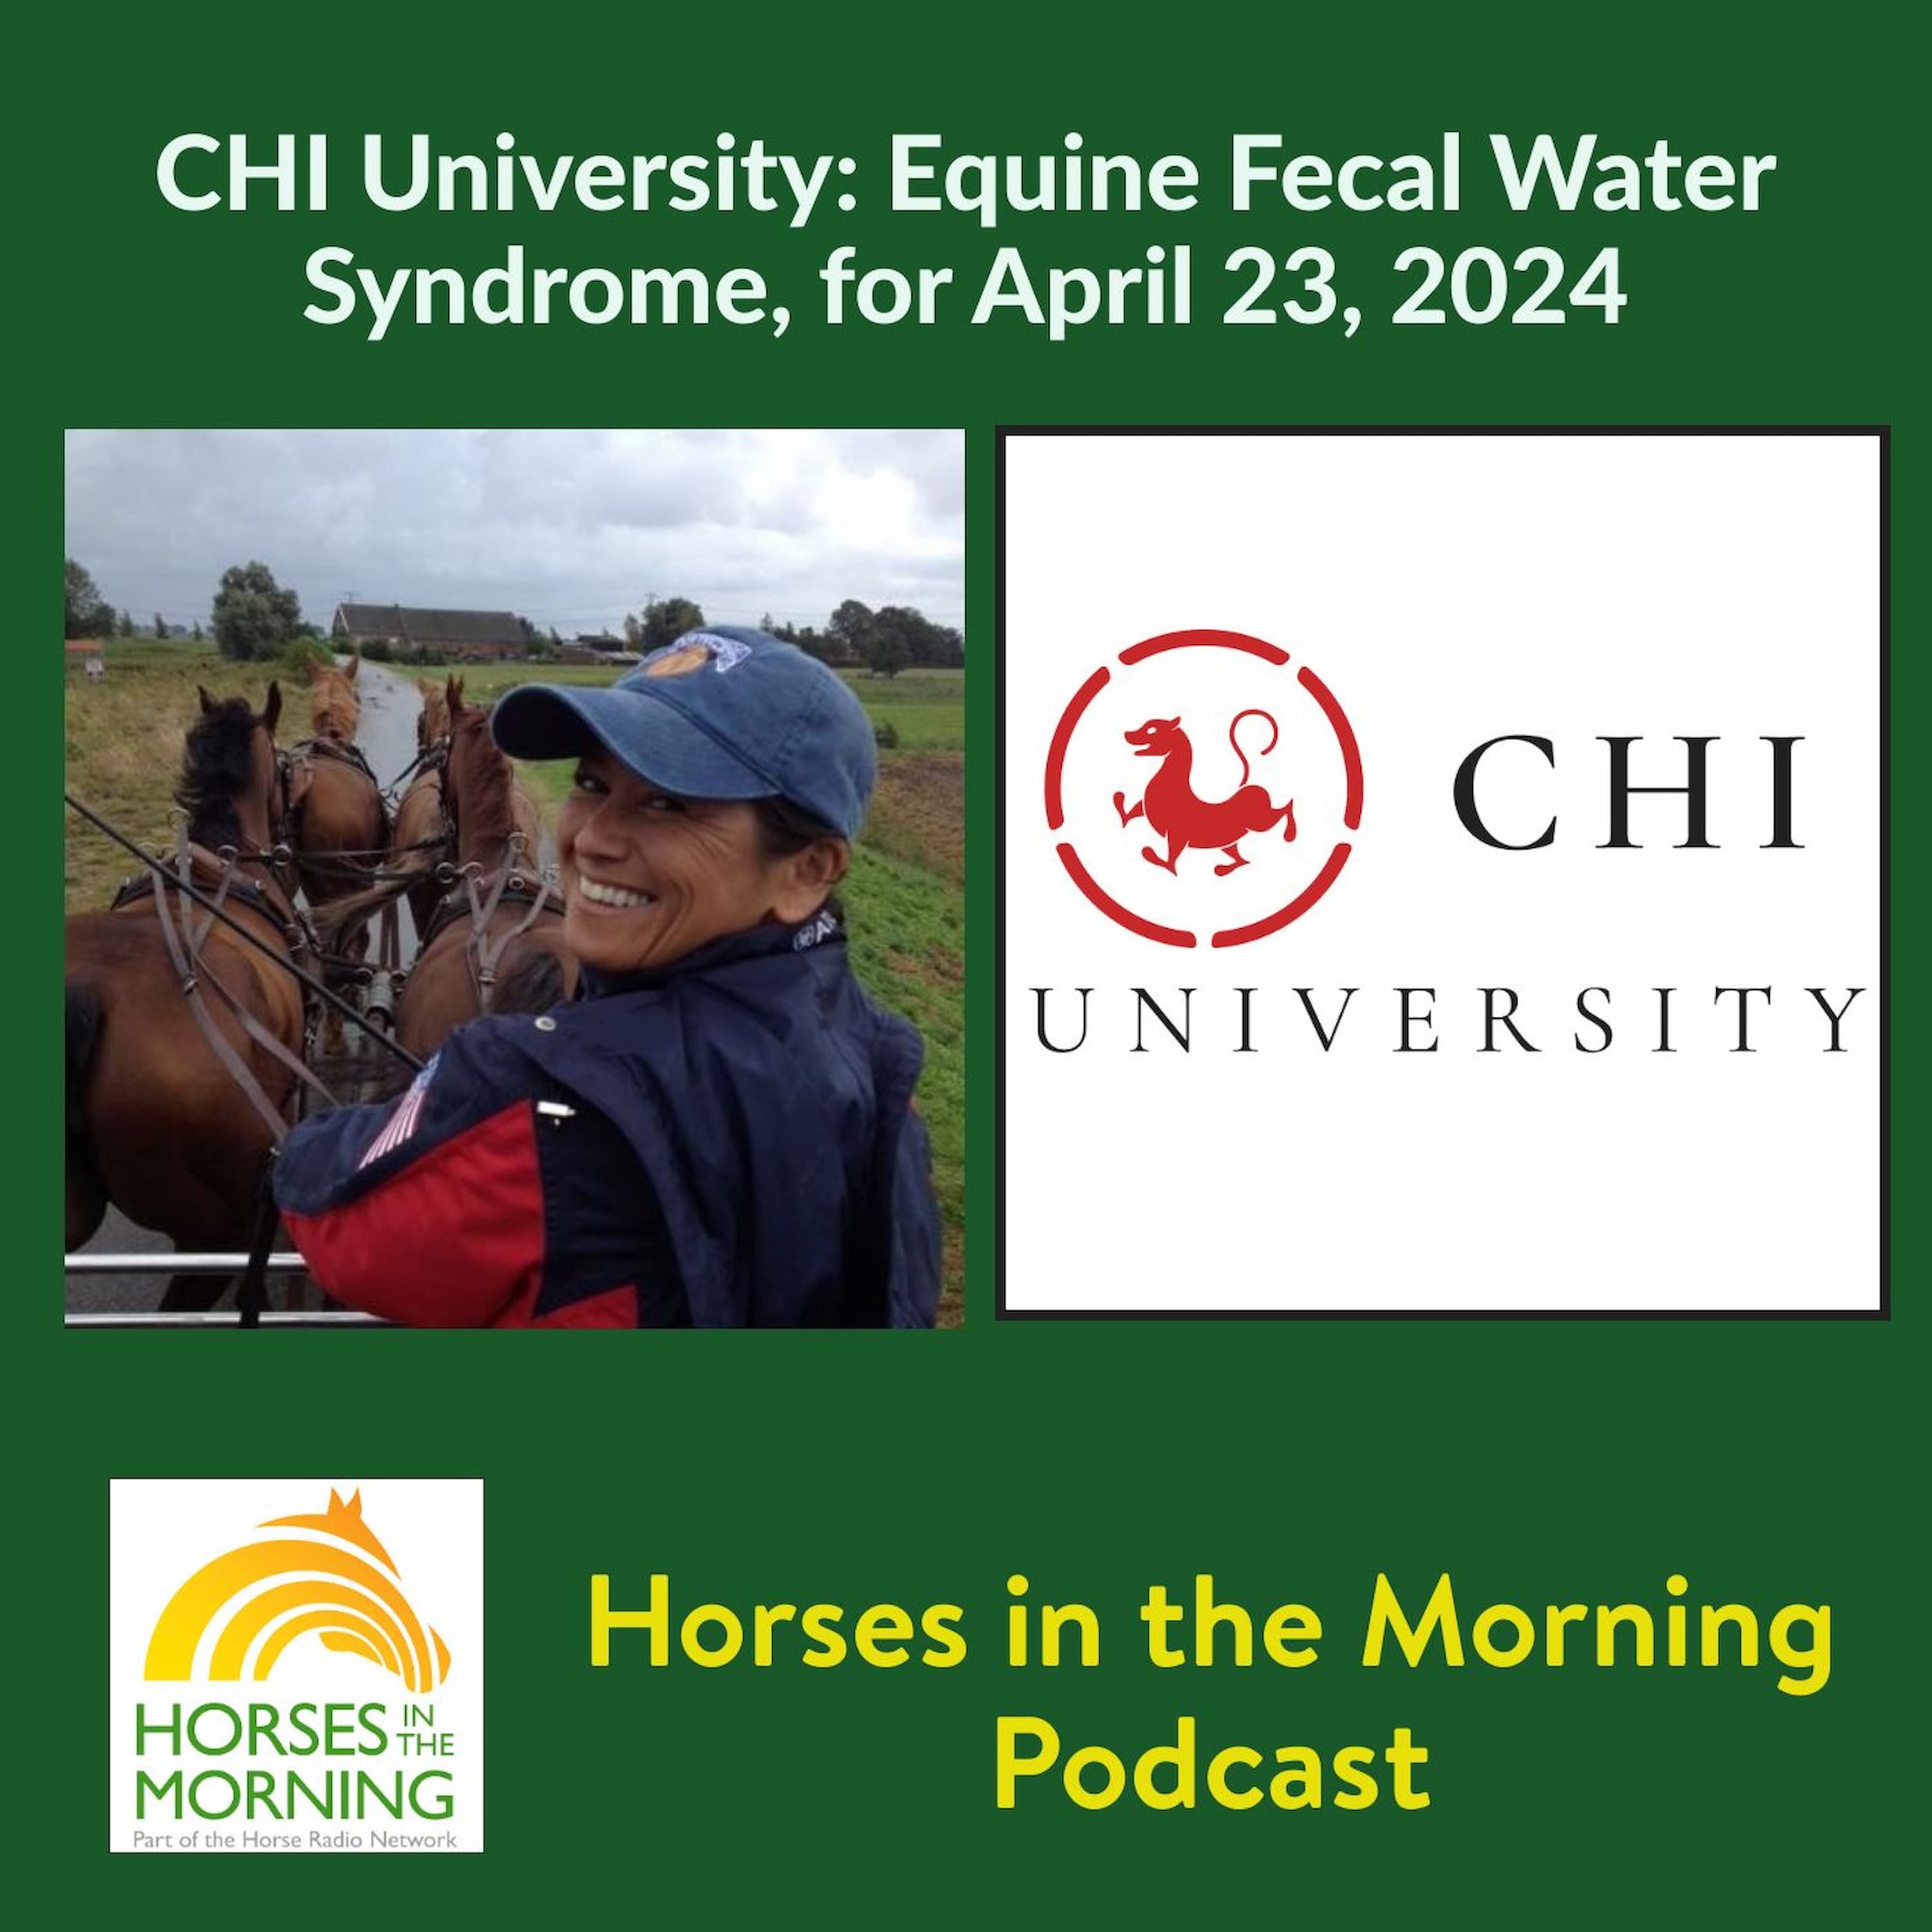 CHI University: Equine Fecal Water Syndrome, for April 23, 2024